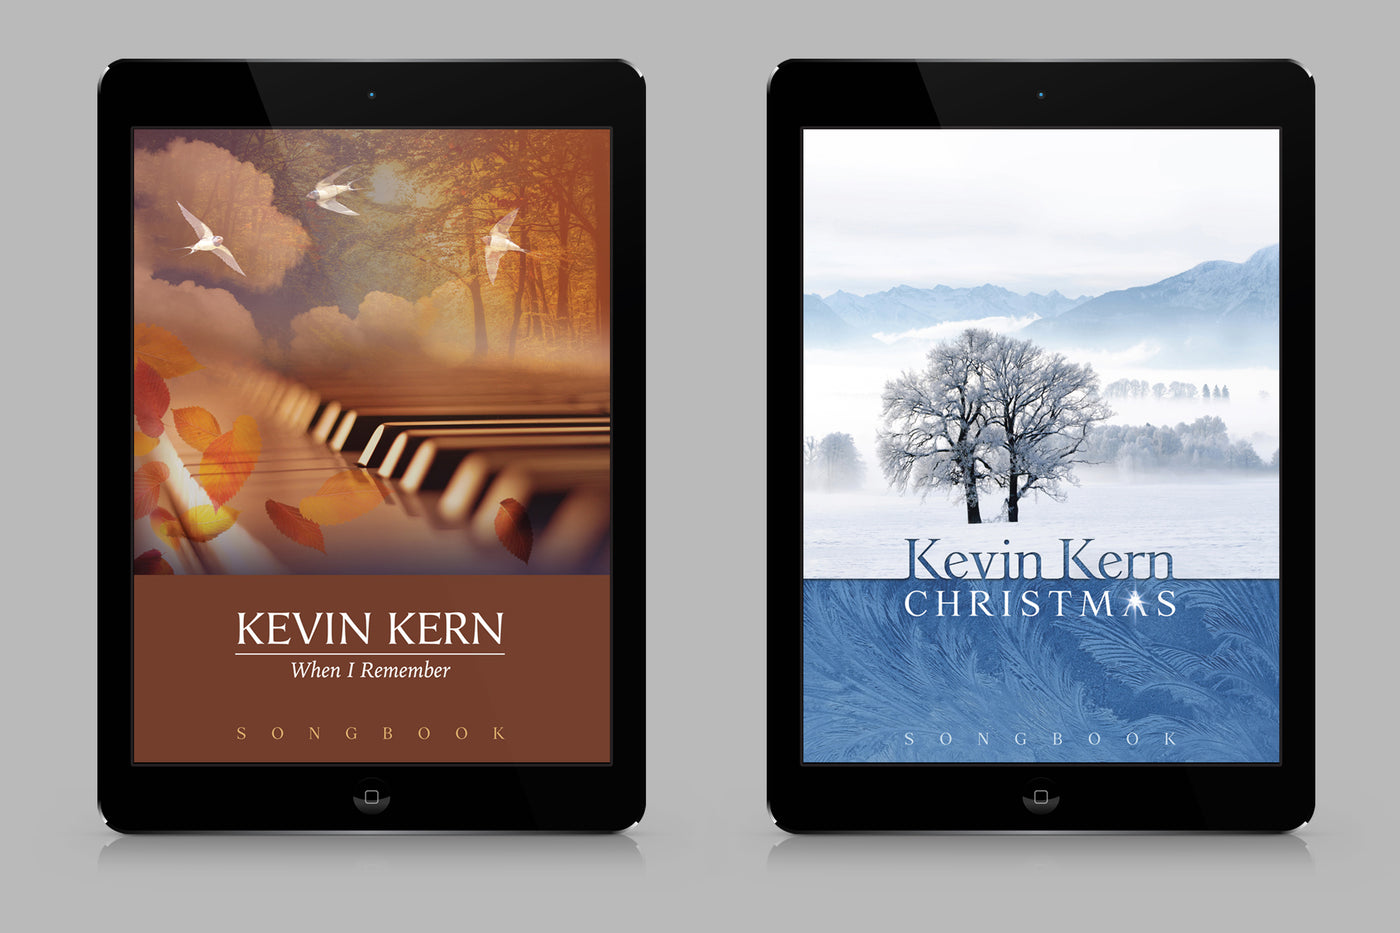 Two digital piano songbooks (displayed each on an iPad) by pianist Kevin Kern - When I Remember and Christmas.